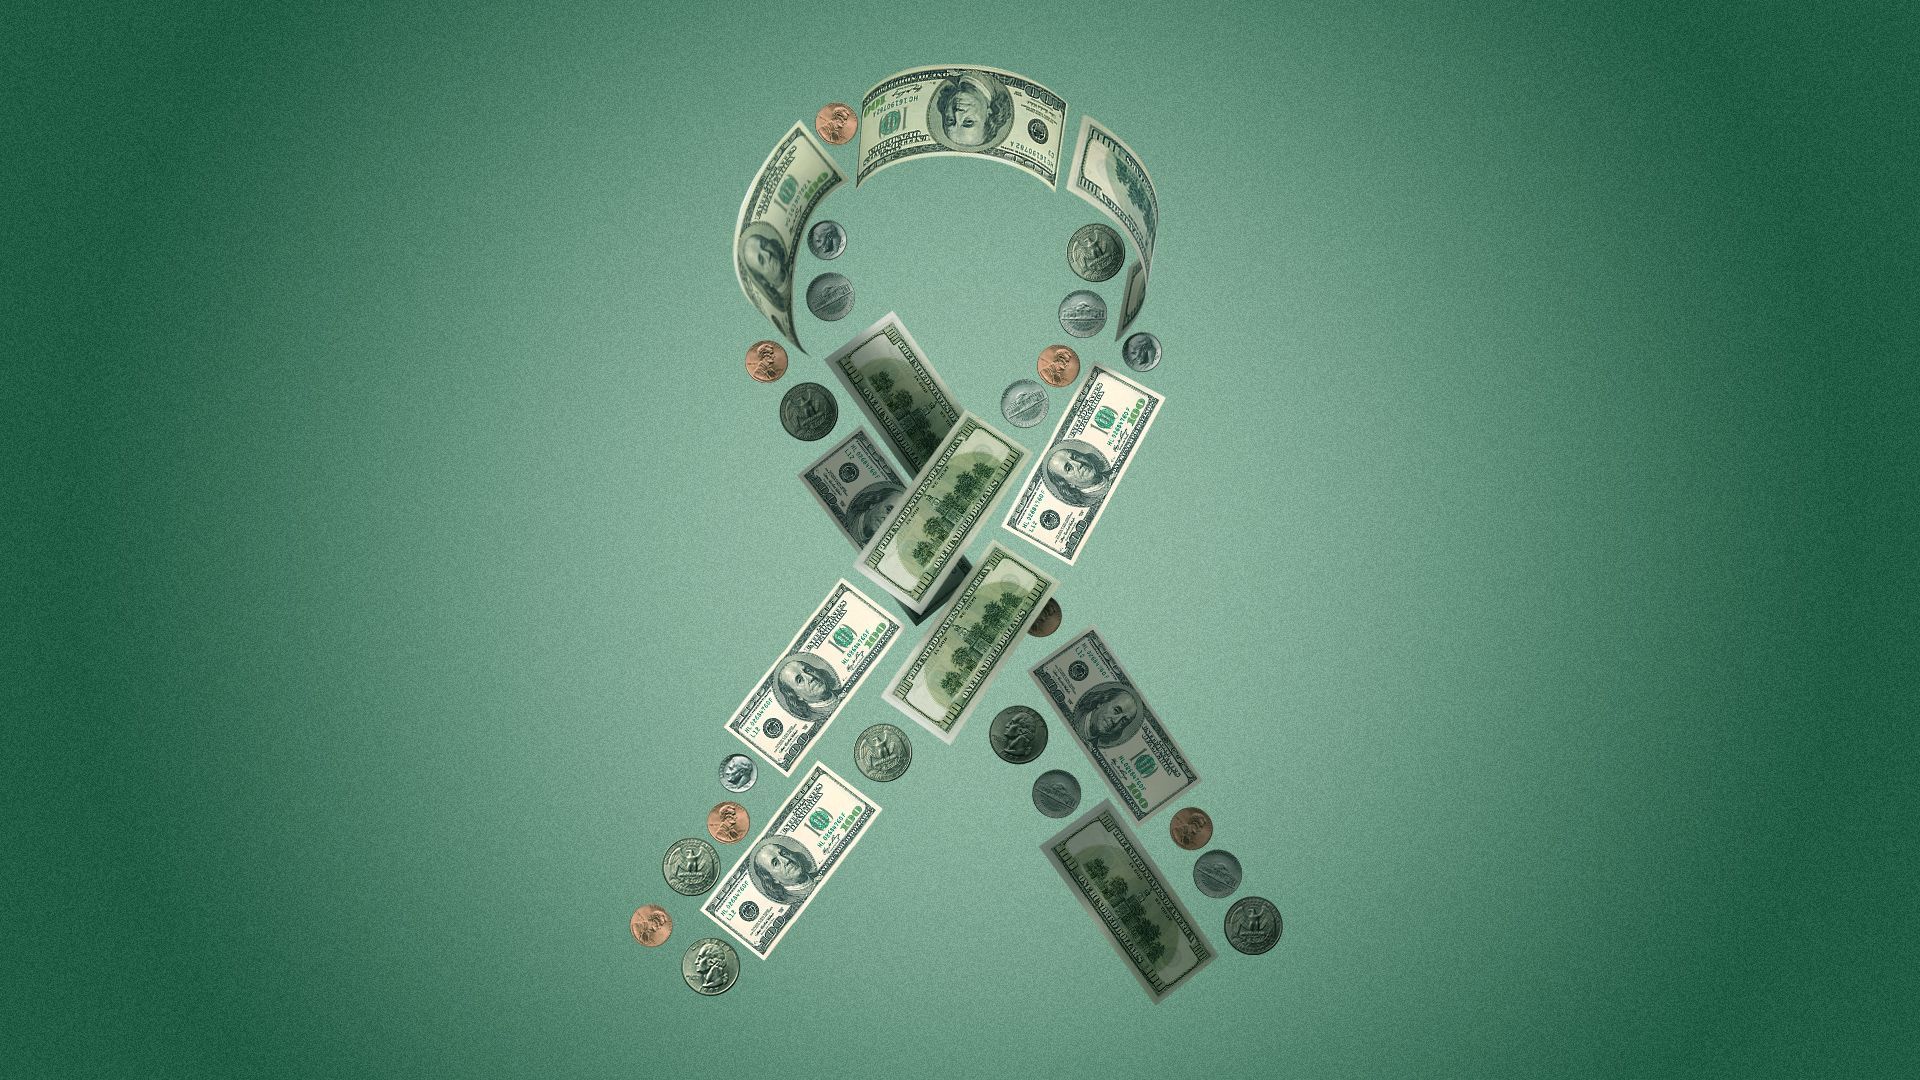 Illustration of hundred dollar bills and coins arranged in the shape of a cancer ribbon.